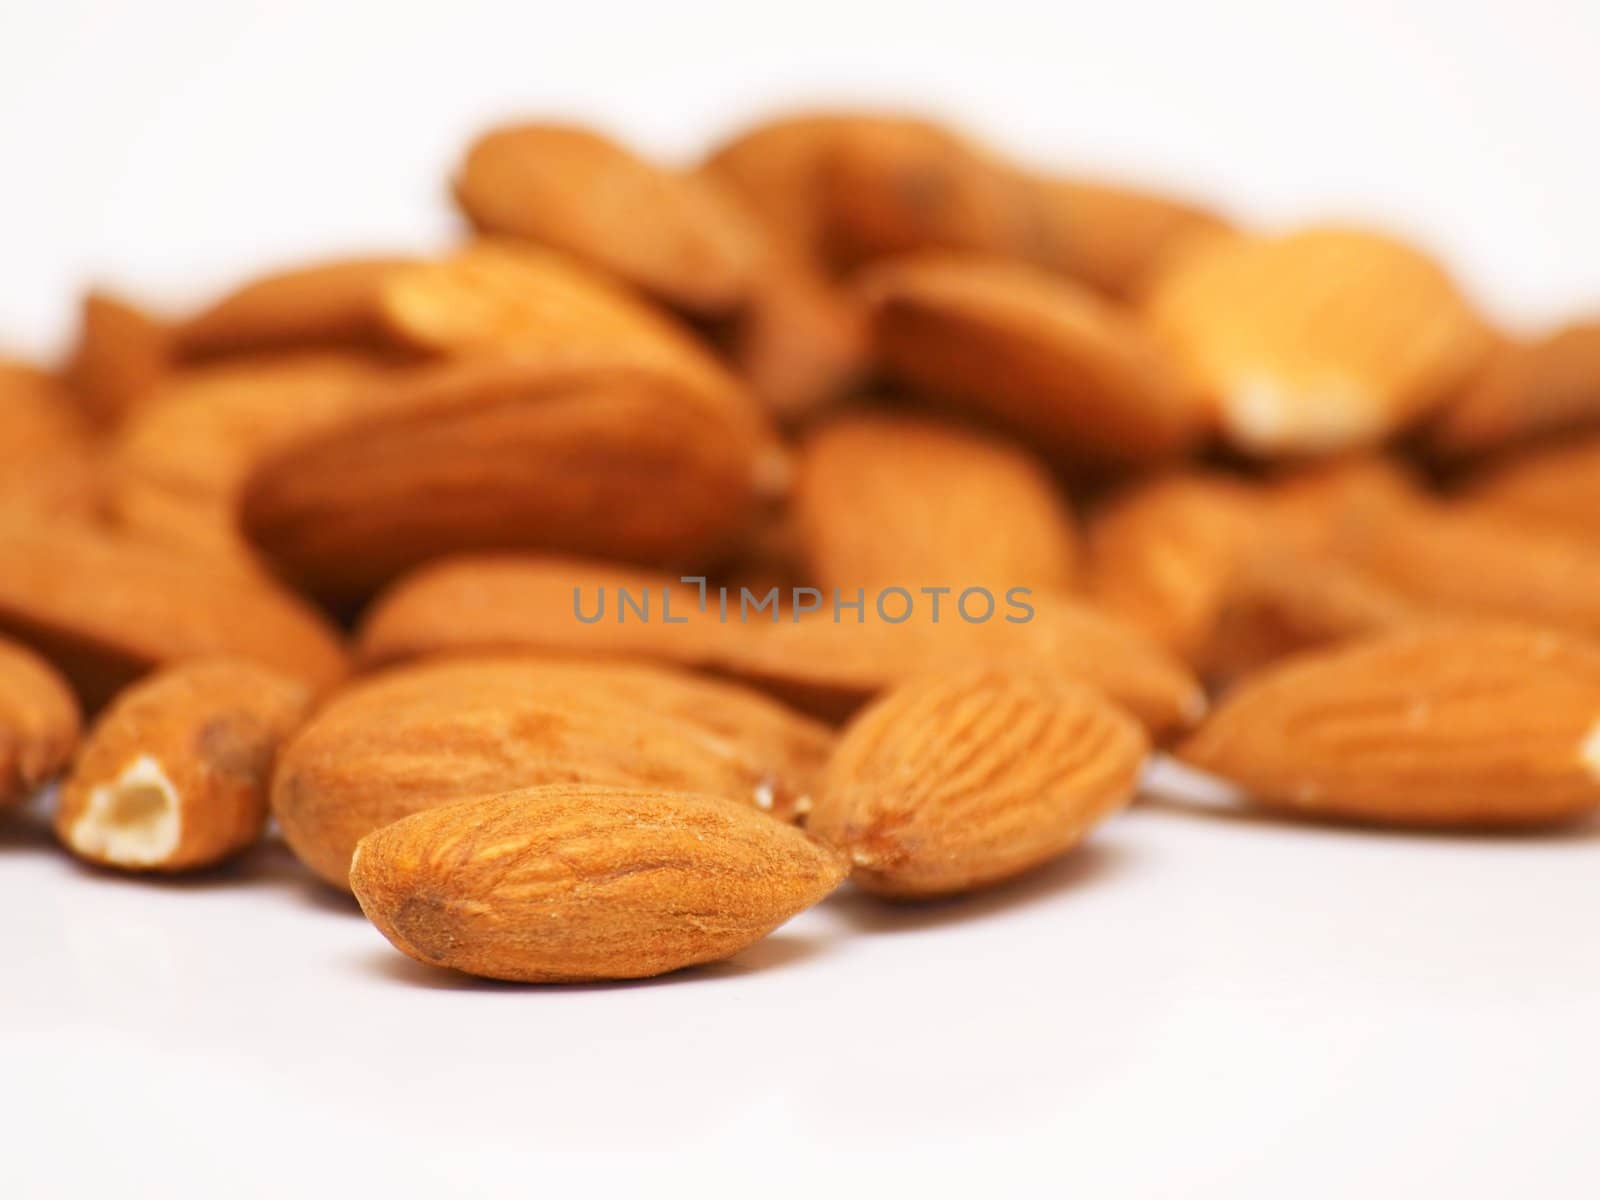 Bunch of almonds laying on top of a white plate